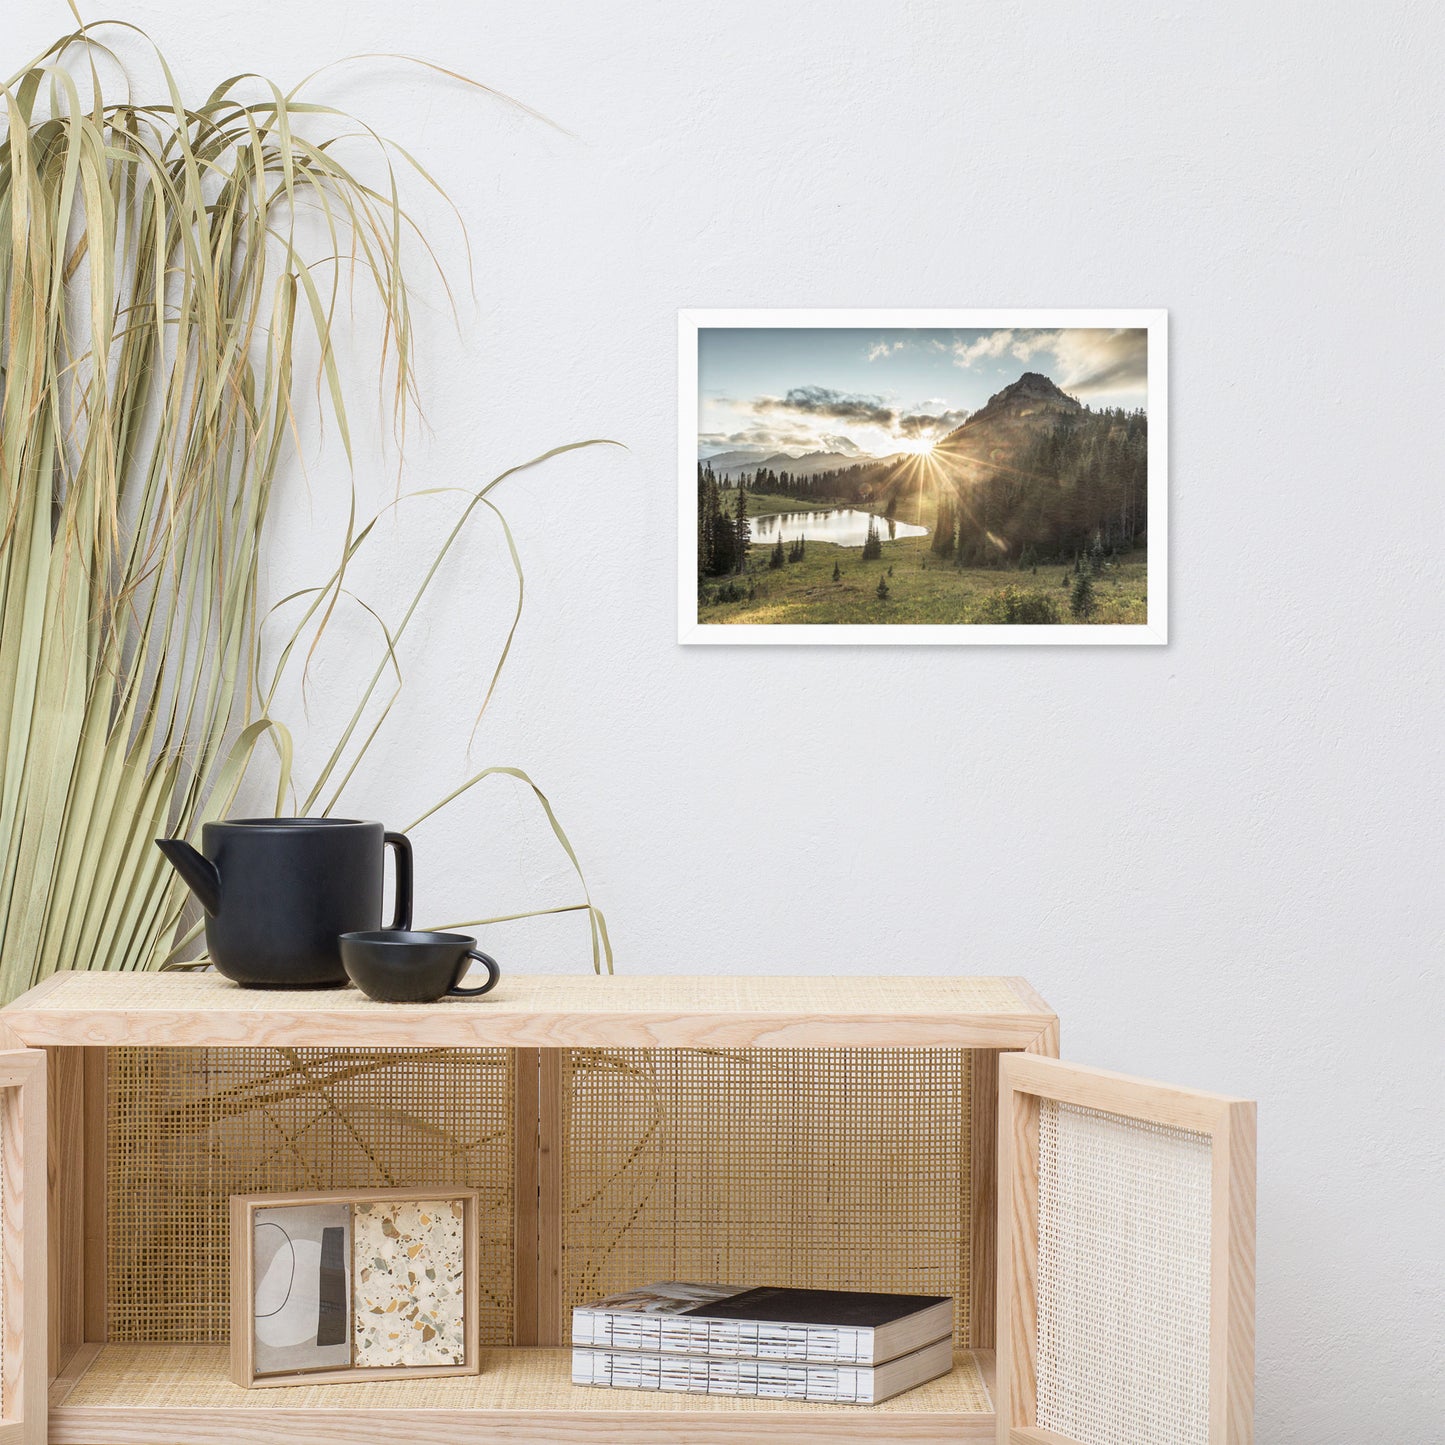 At Peace Rustic Landscape Photograph Framed Wall Art Print